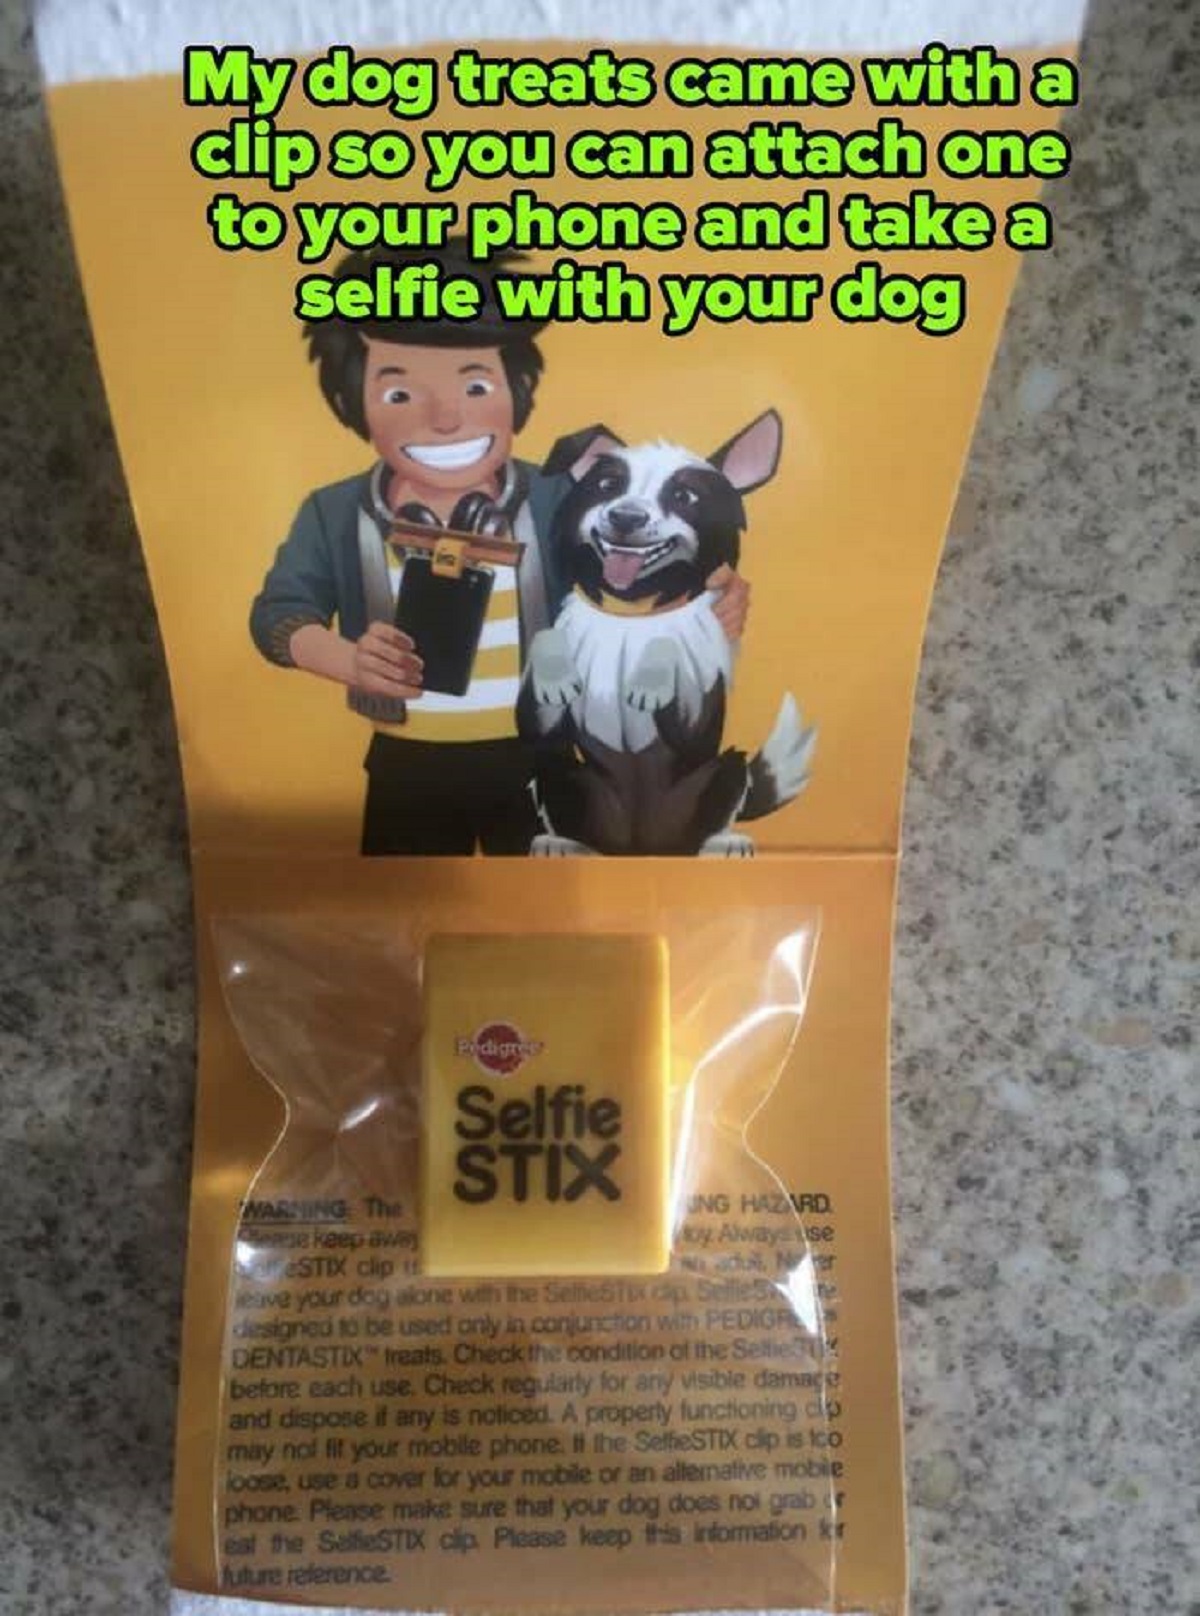 boston terrier - My dog treats came with a clip so you can attach one to your phone and take a selfie with your dog Selfie Stix Pedica DENTASTICs Check the condon Chuck ropay for and depose any incoed A property functoring may not your mobile phone te cos